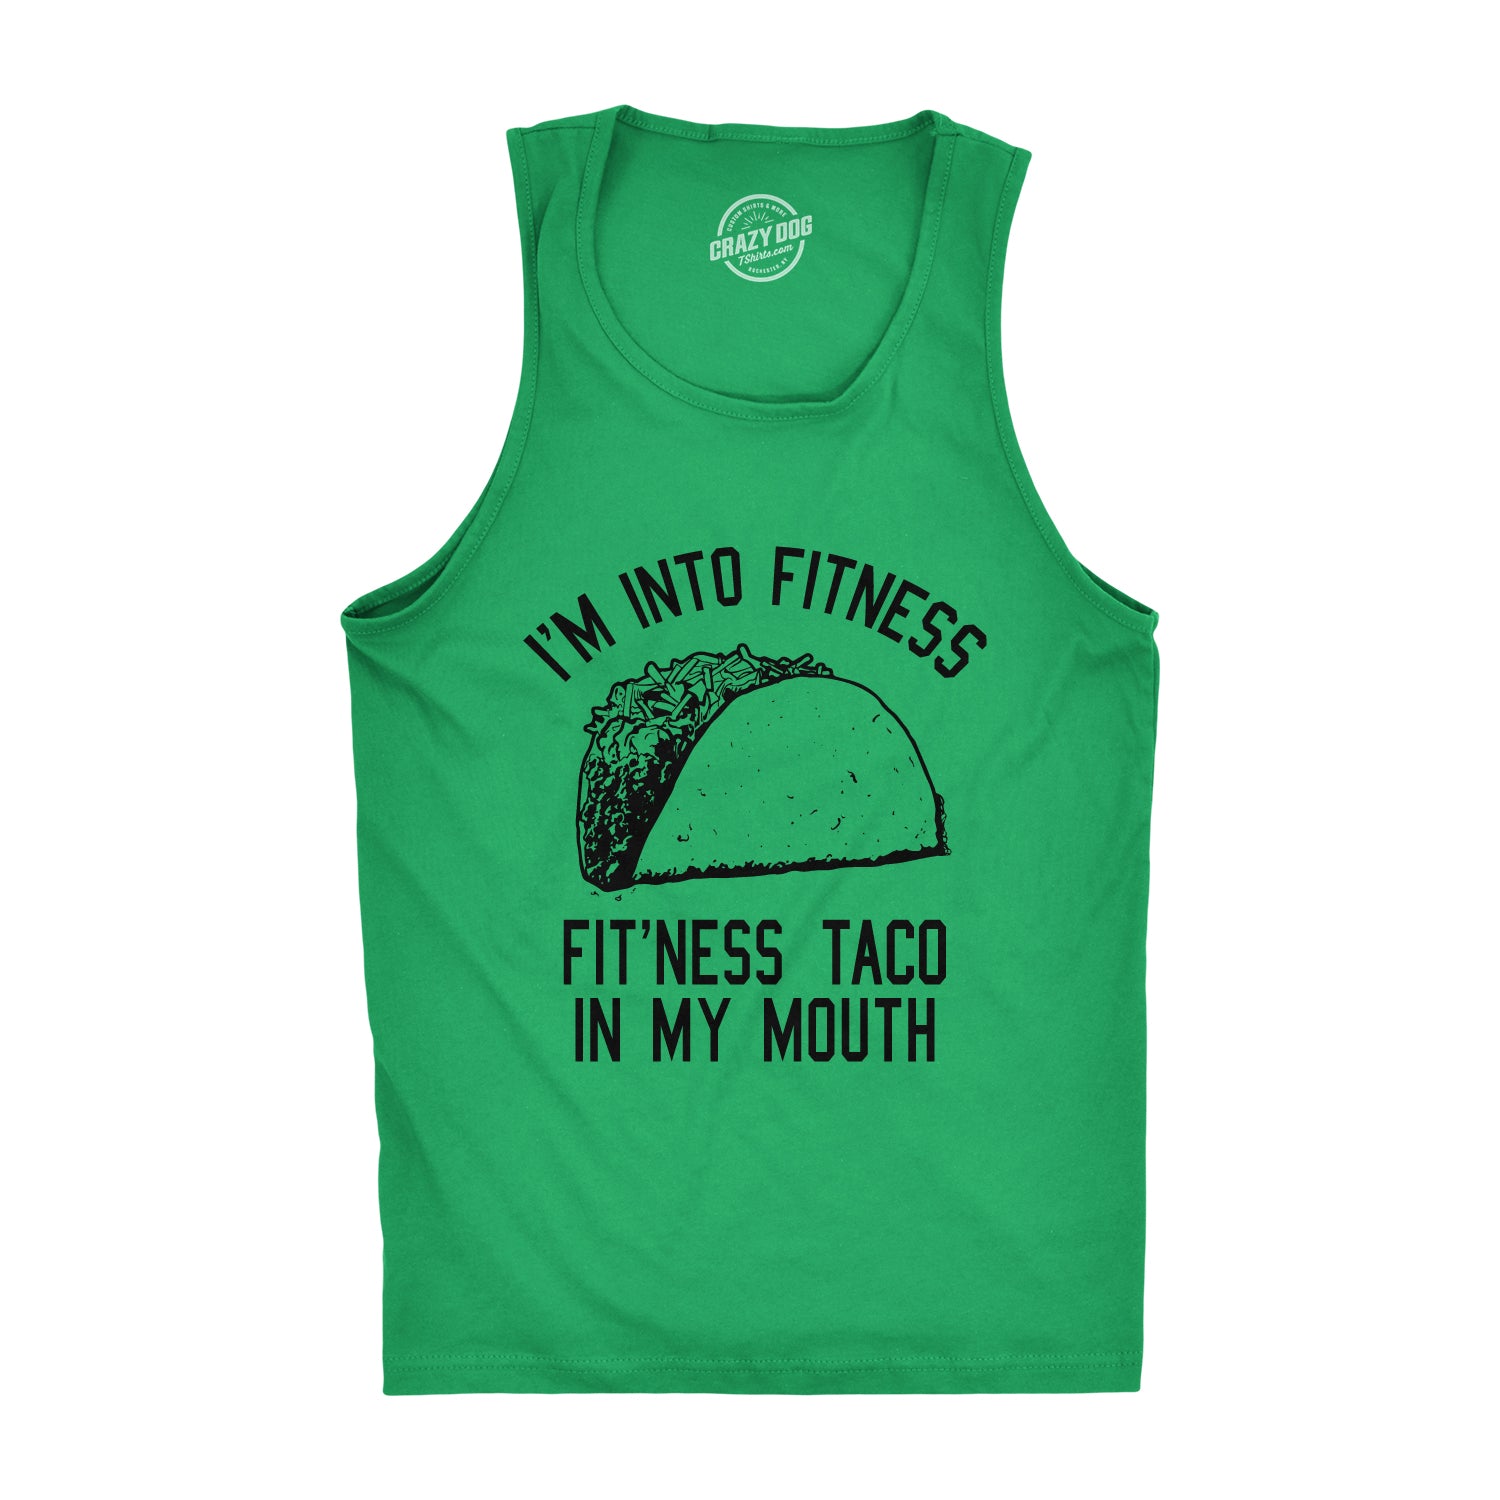 Funny Light Heather Grey - Fitness Taco I'm Into Fitness Fit'ness Taco In My Mouth Mens Tank Top Nerdy Cinco De Mayo Fitness Tee